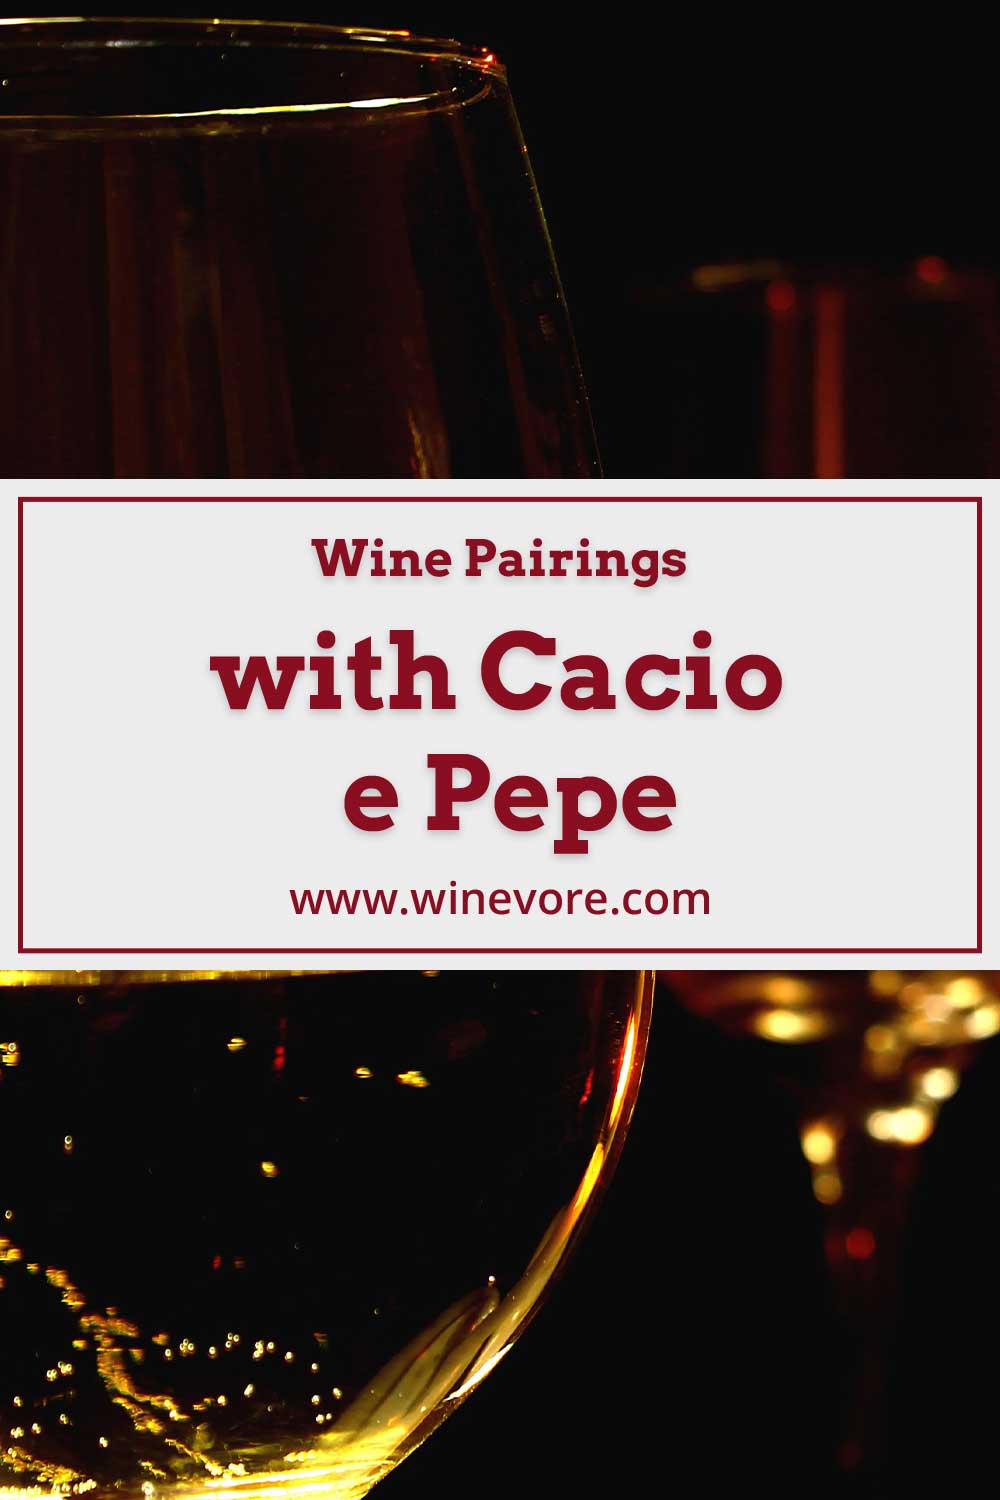 Two wine glasses with wine in them - Wine Pairings with Cacio e Pepe.